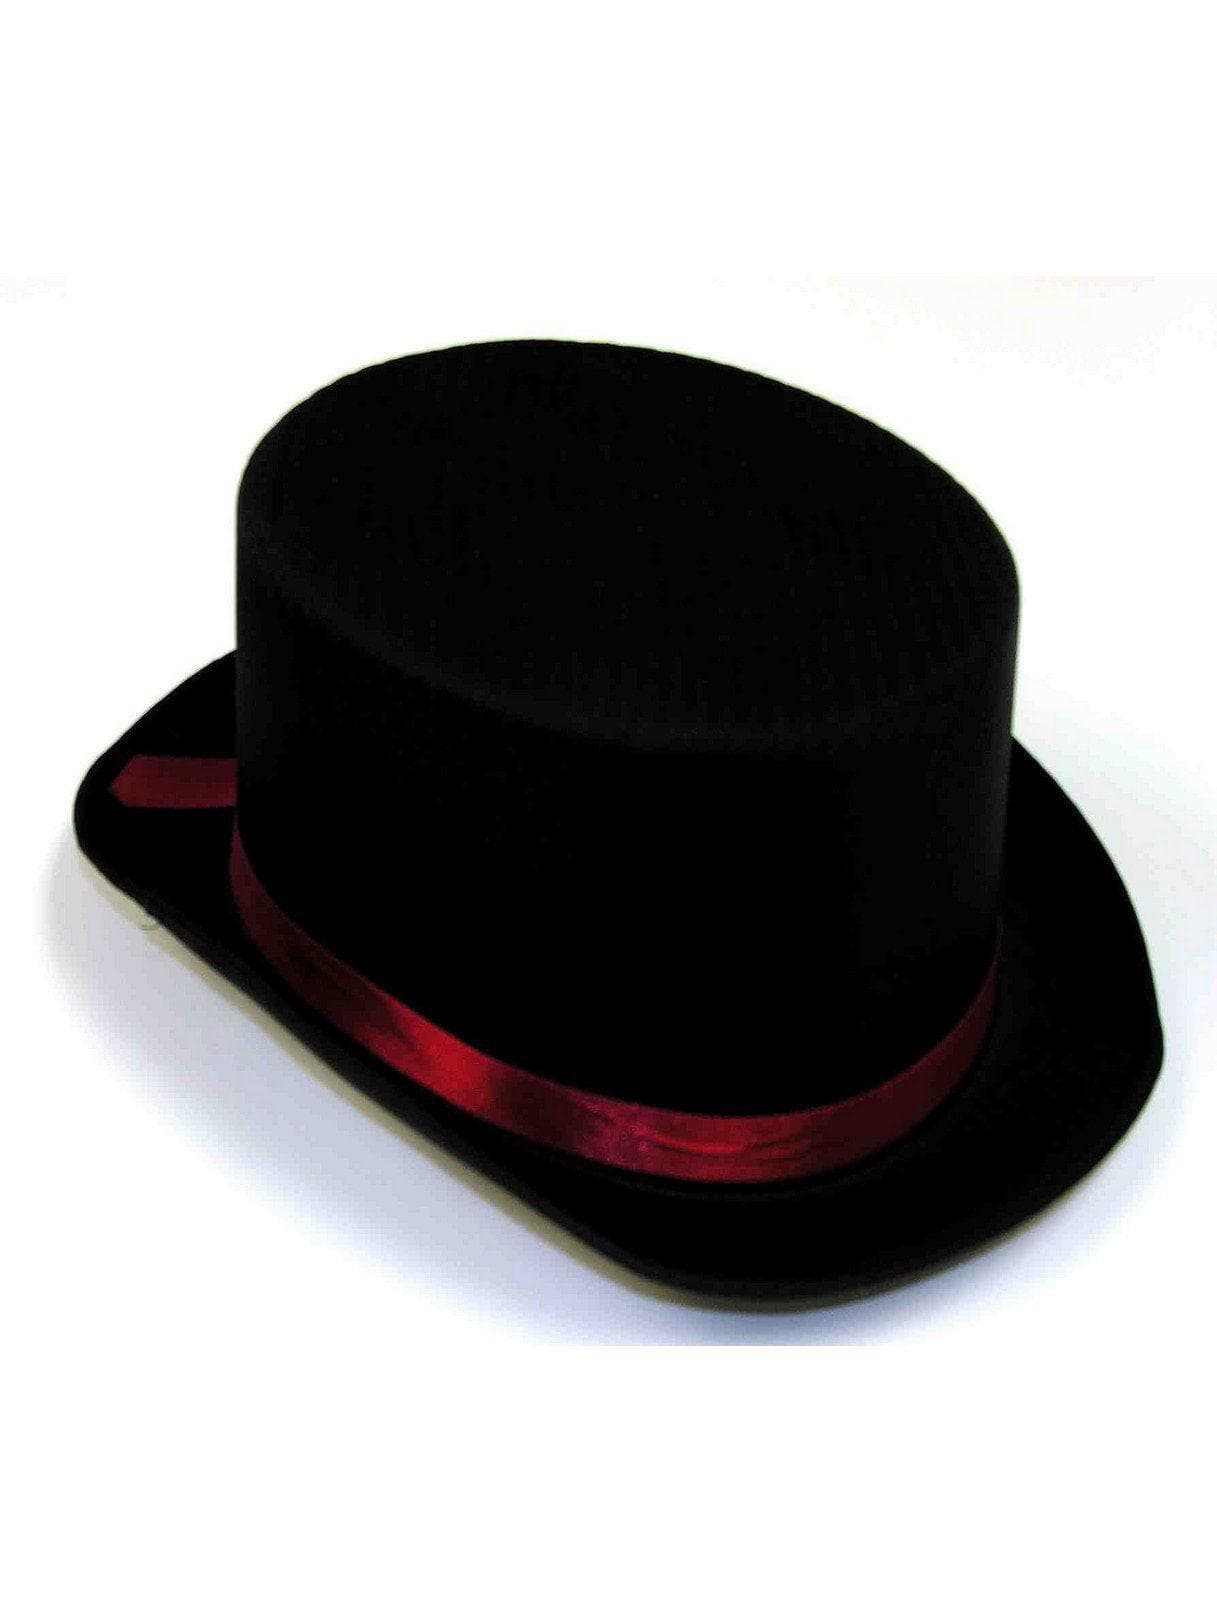 Adult Black Classic Top Hat with Red Trim - costumes.com